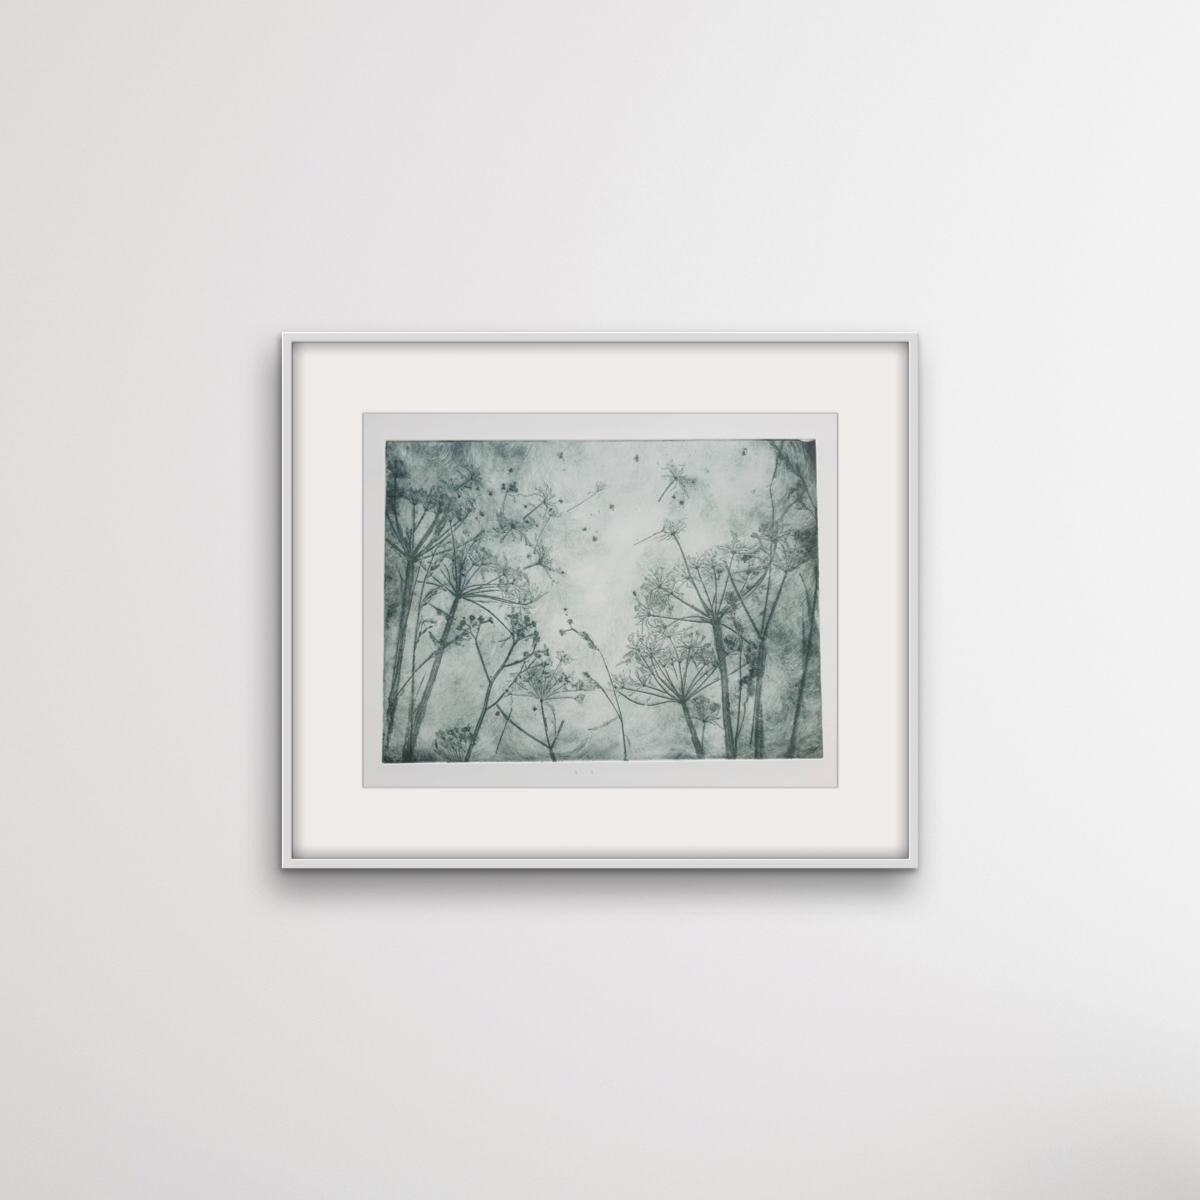 This soft ground etching was made using impressions of natural plants and printed with etching inks on Fabriano paper. This print is a variable edition of 100, and is signed, numbered and comes with a certificate of authenticity.

Charlie Davies,